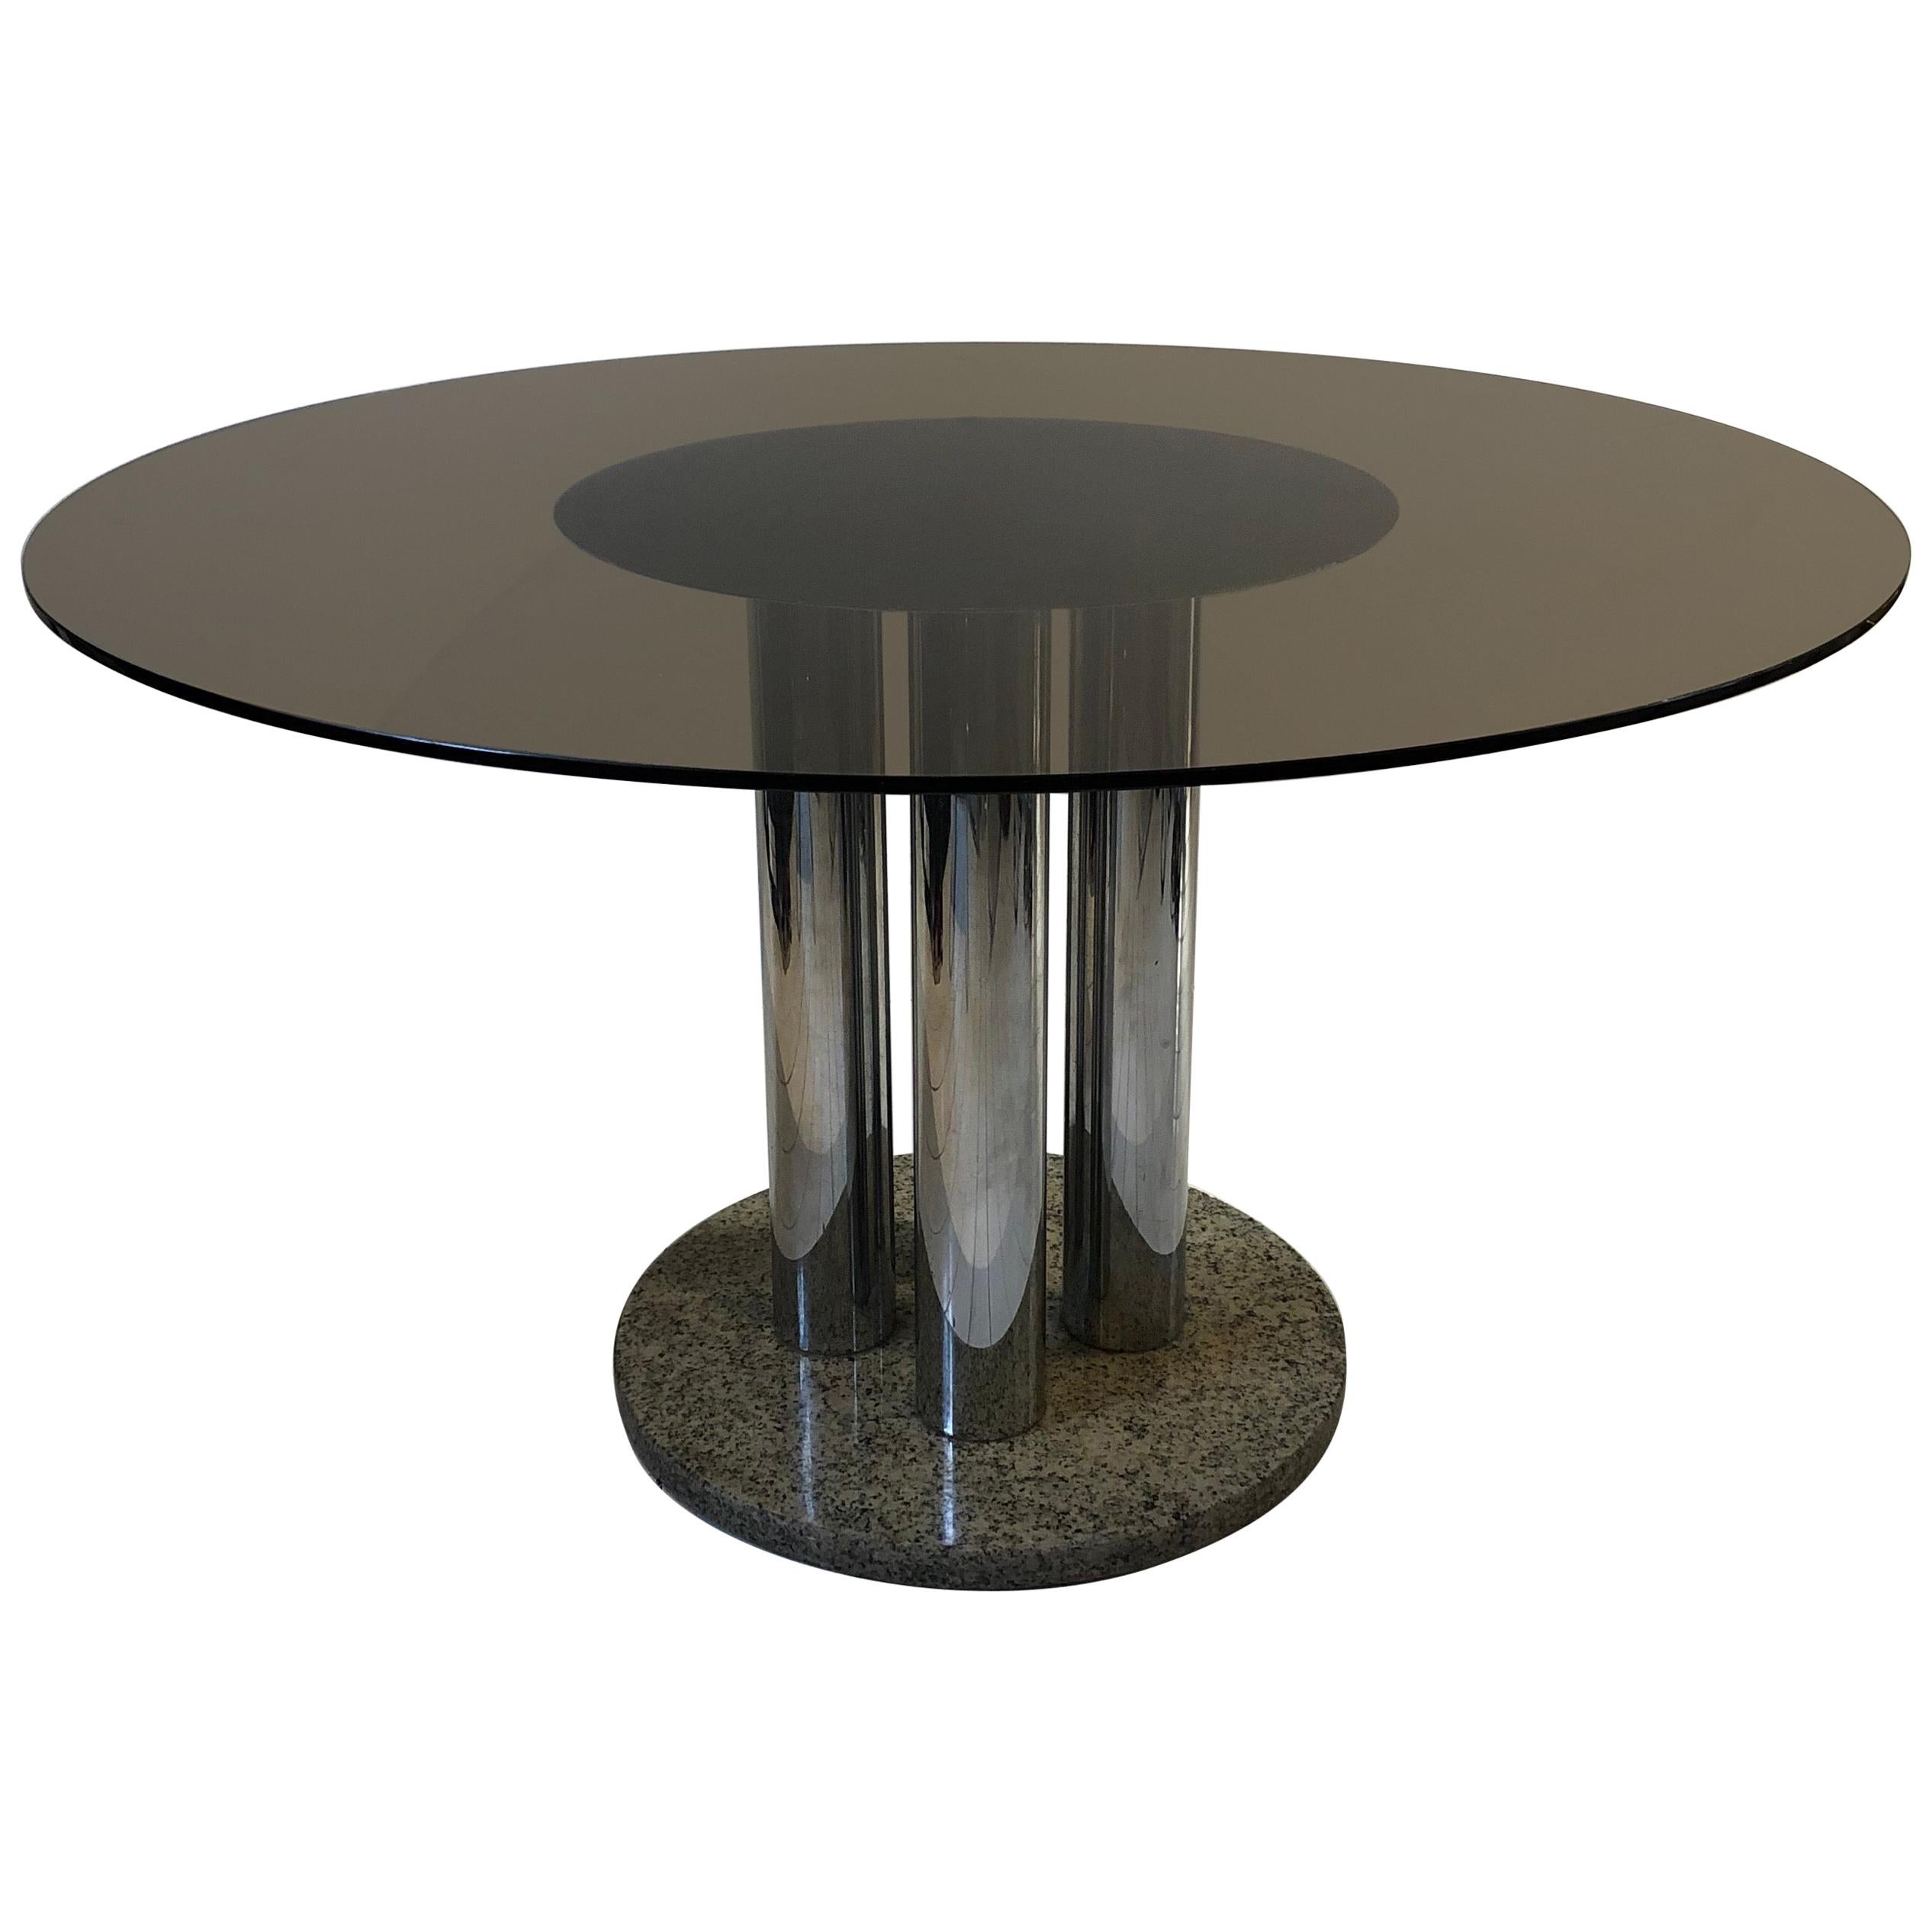 Midcentury Zanuso Zanotta Attributed Round Dining Table Chrome Columns, 1970s For Sale